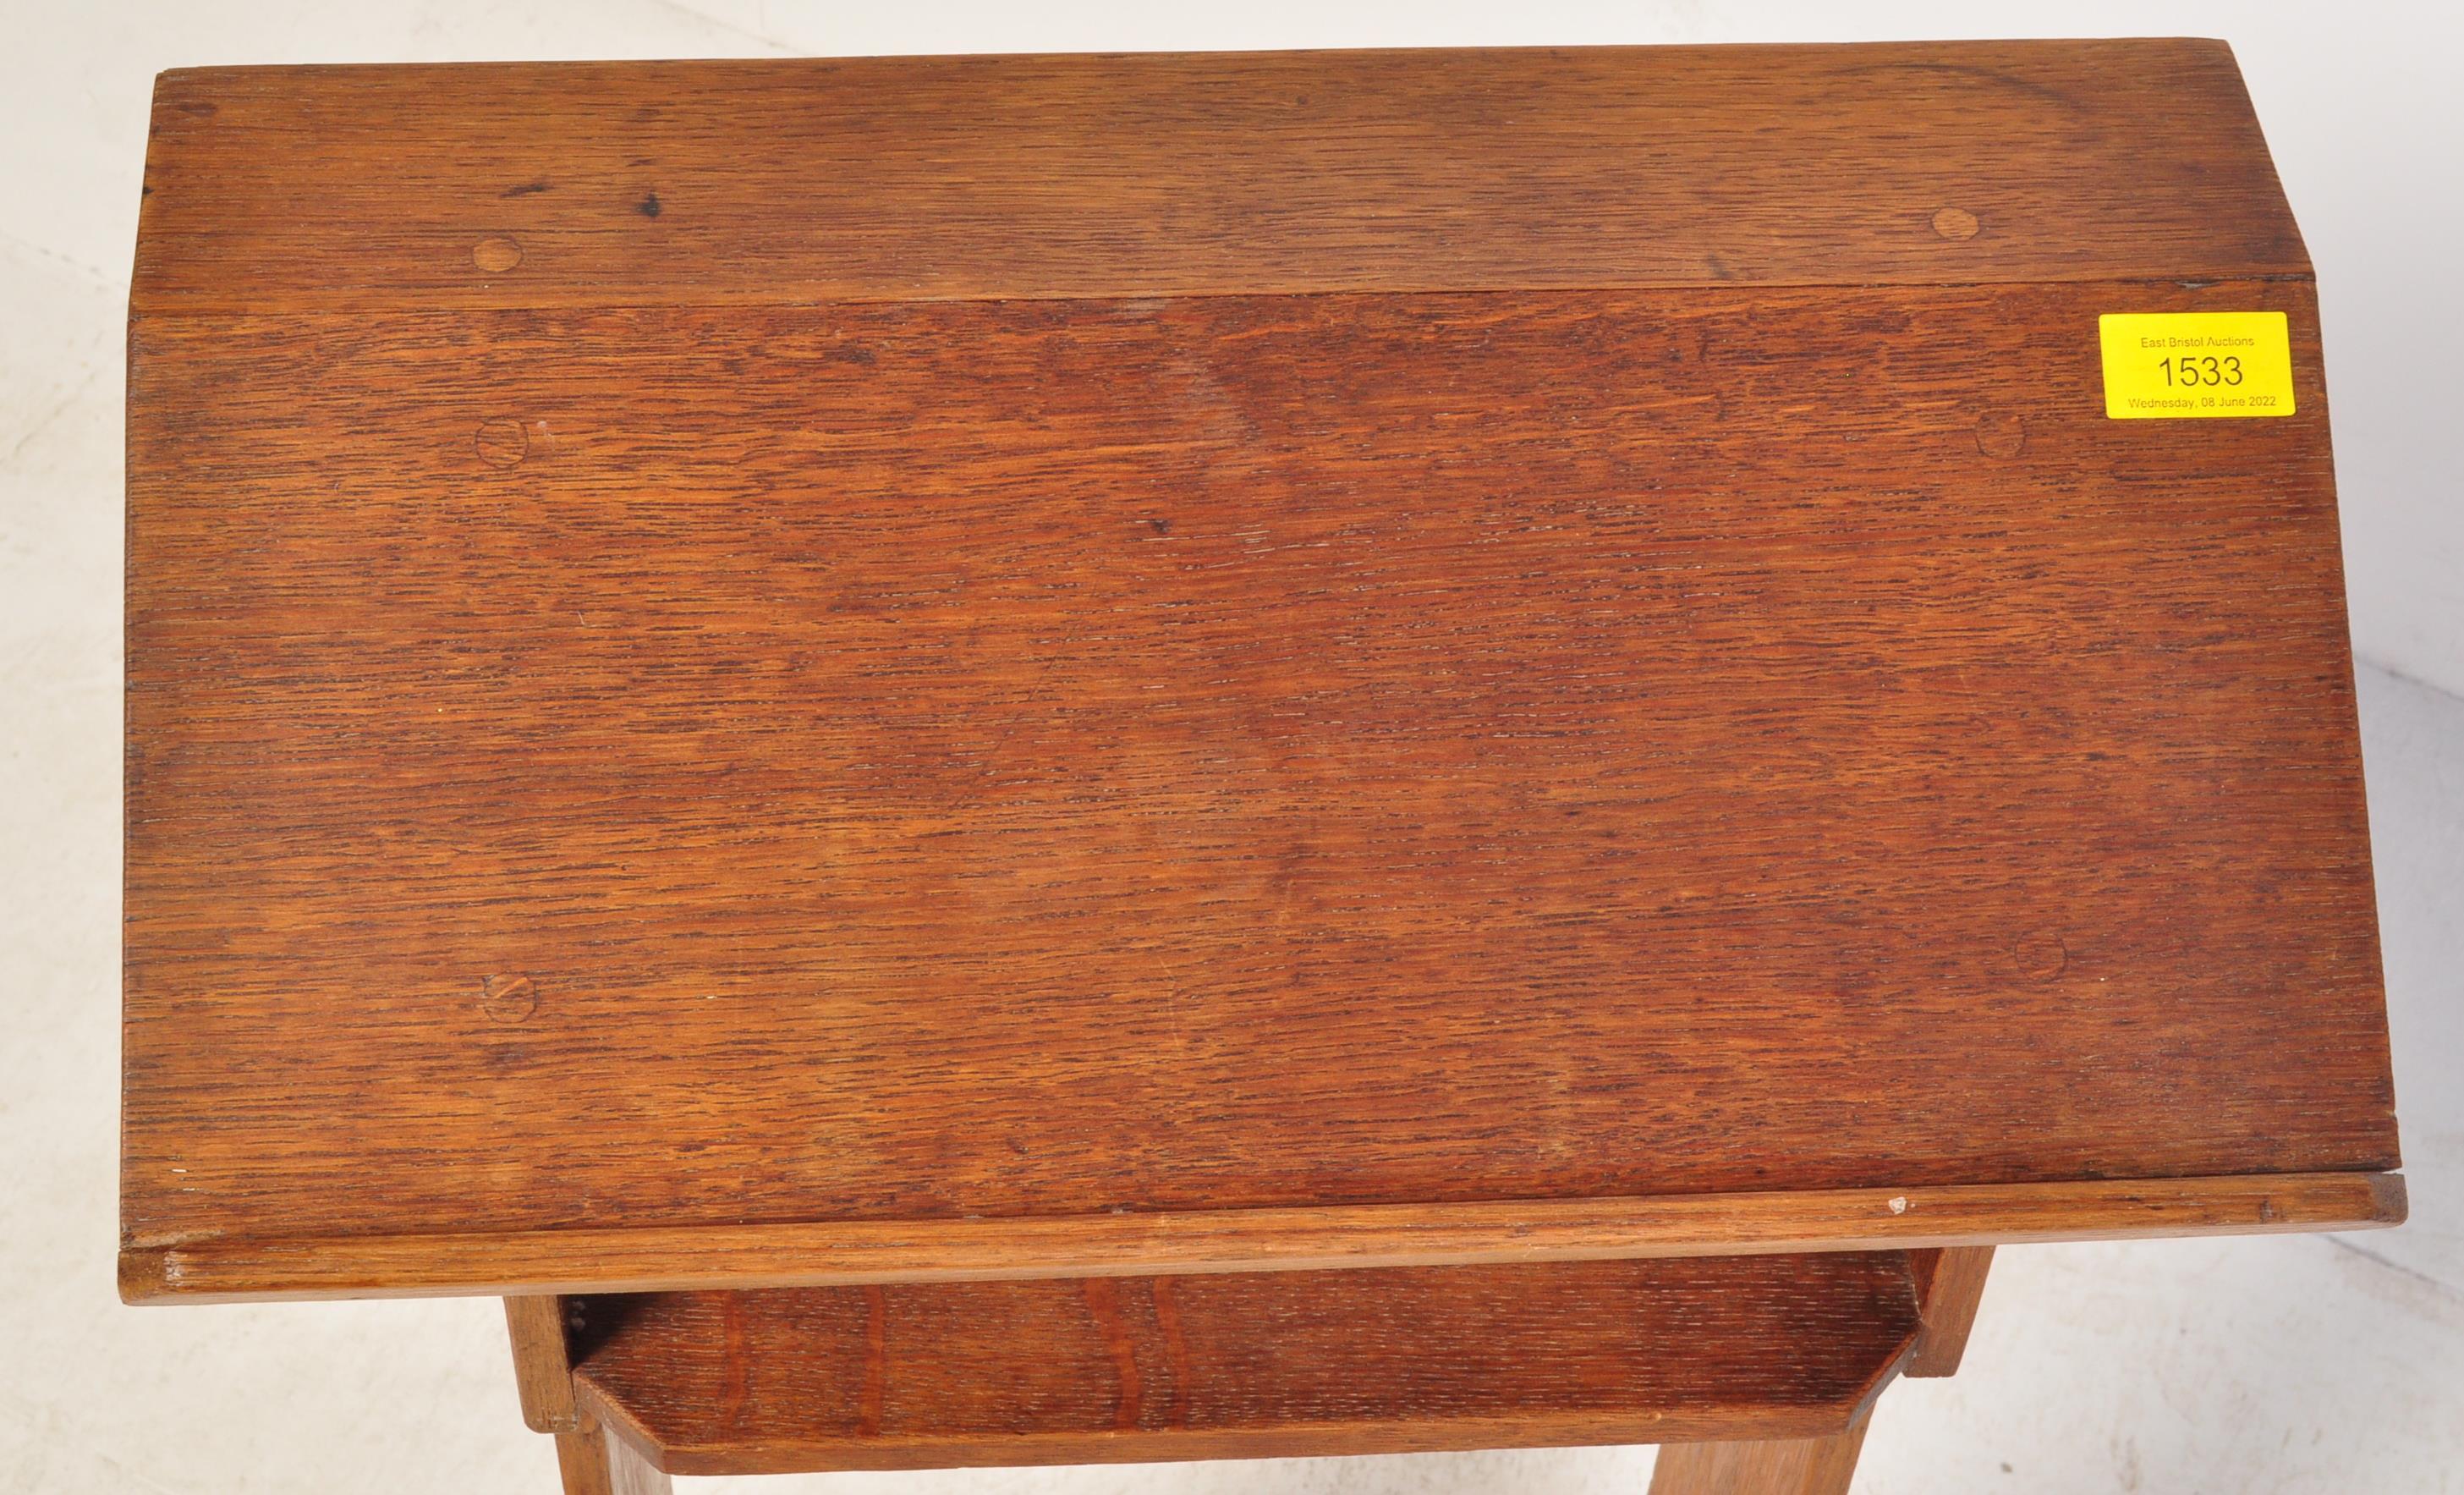 EARLY 20TH CENTURY OAK ECCLESIACTICAL READING LECTERN - Image 3 of 5